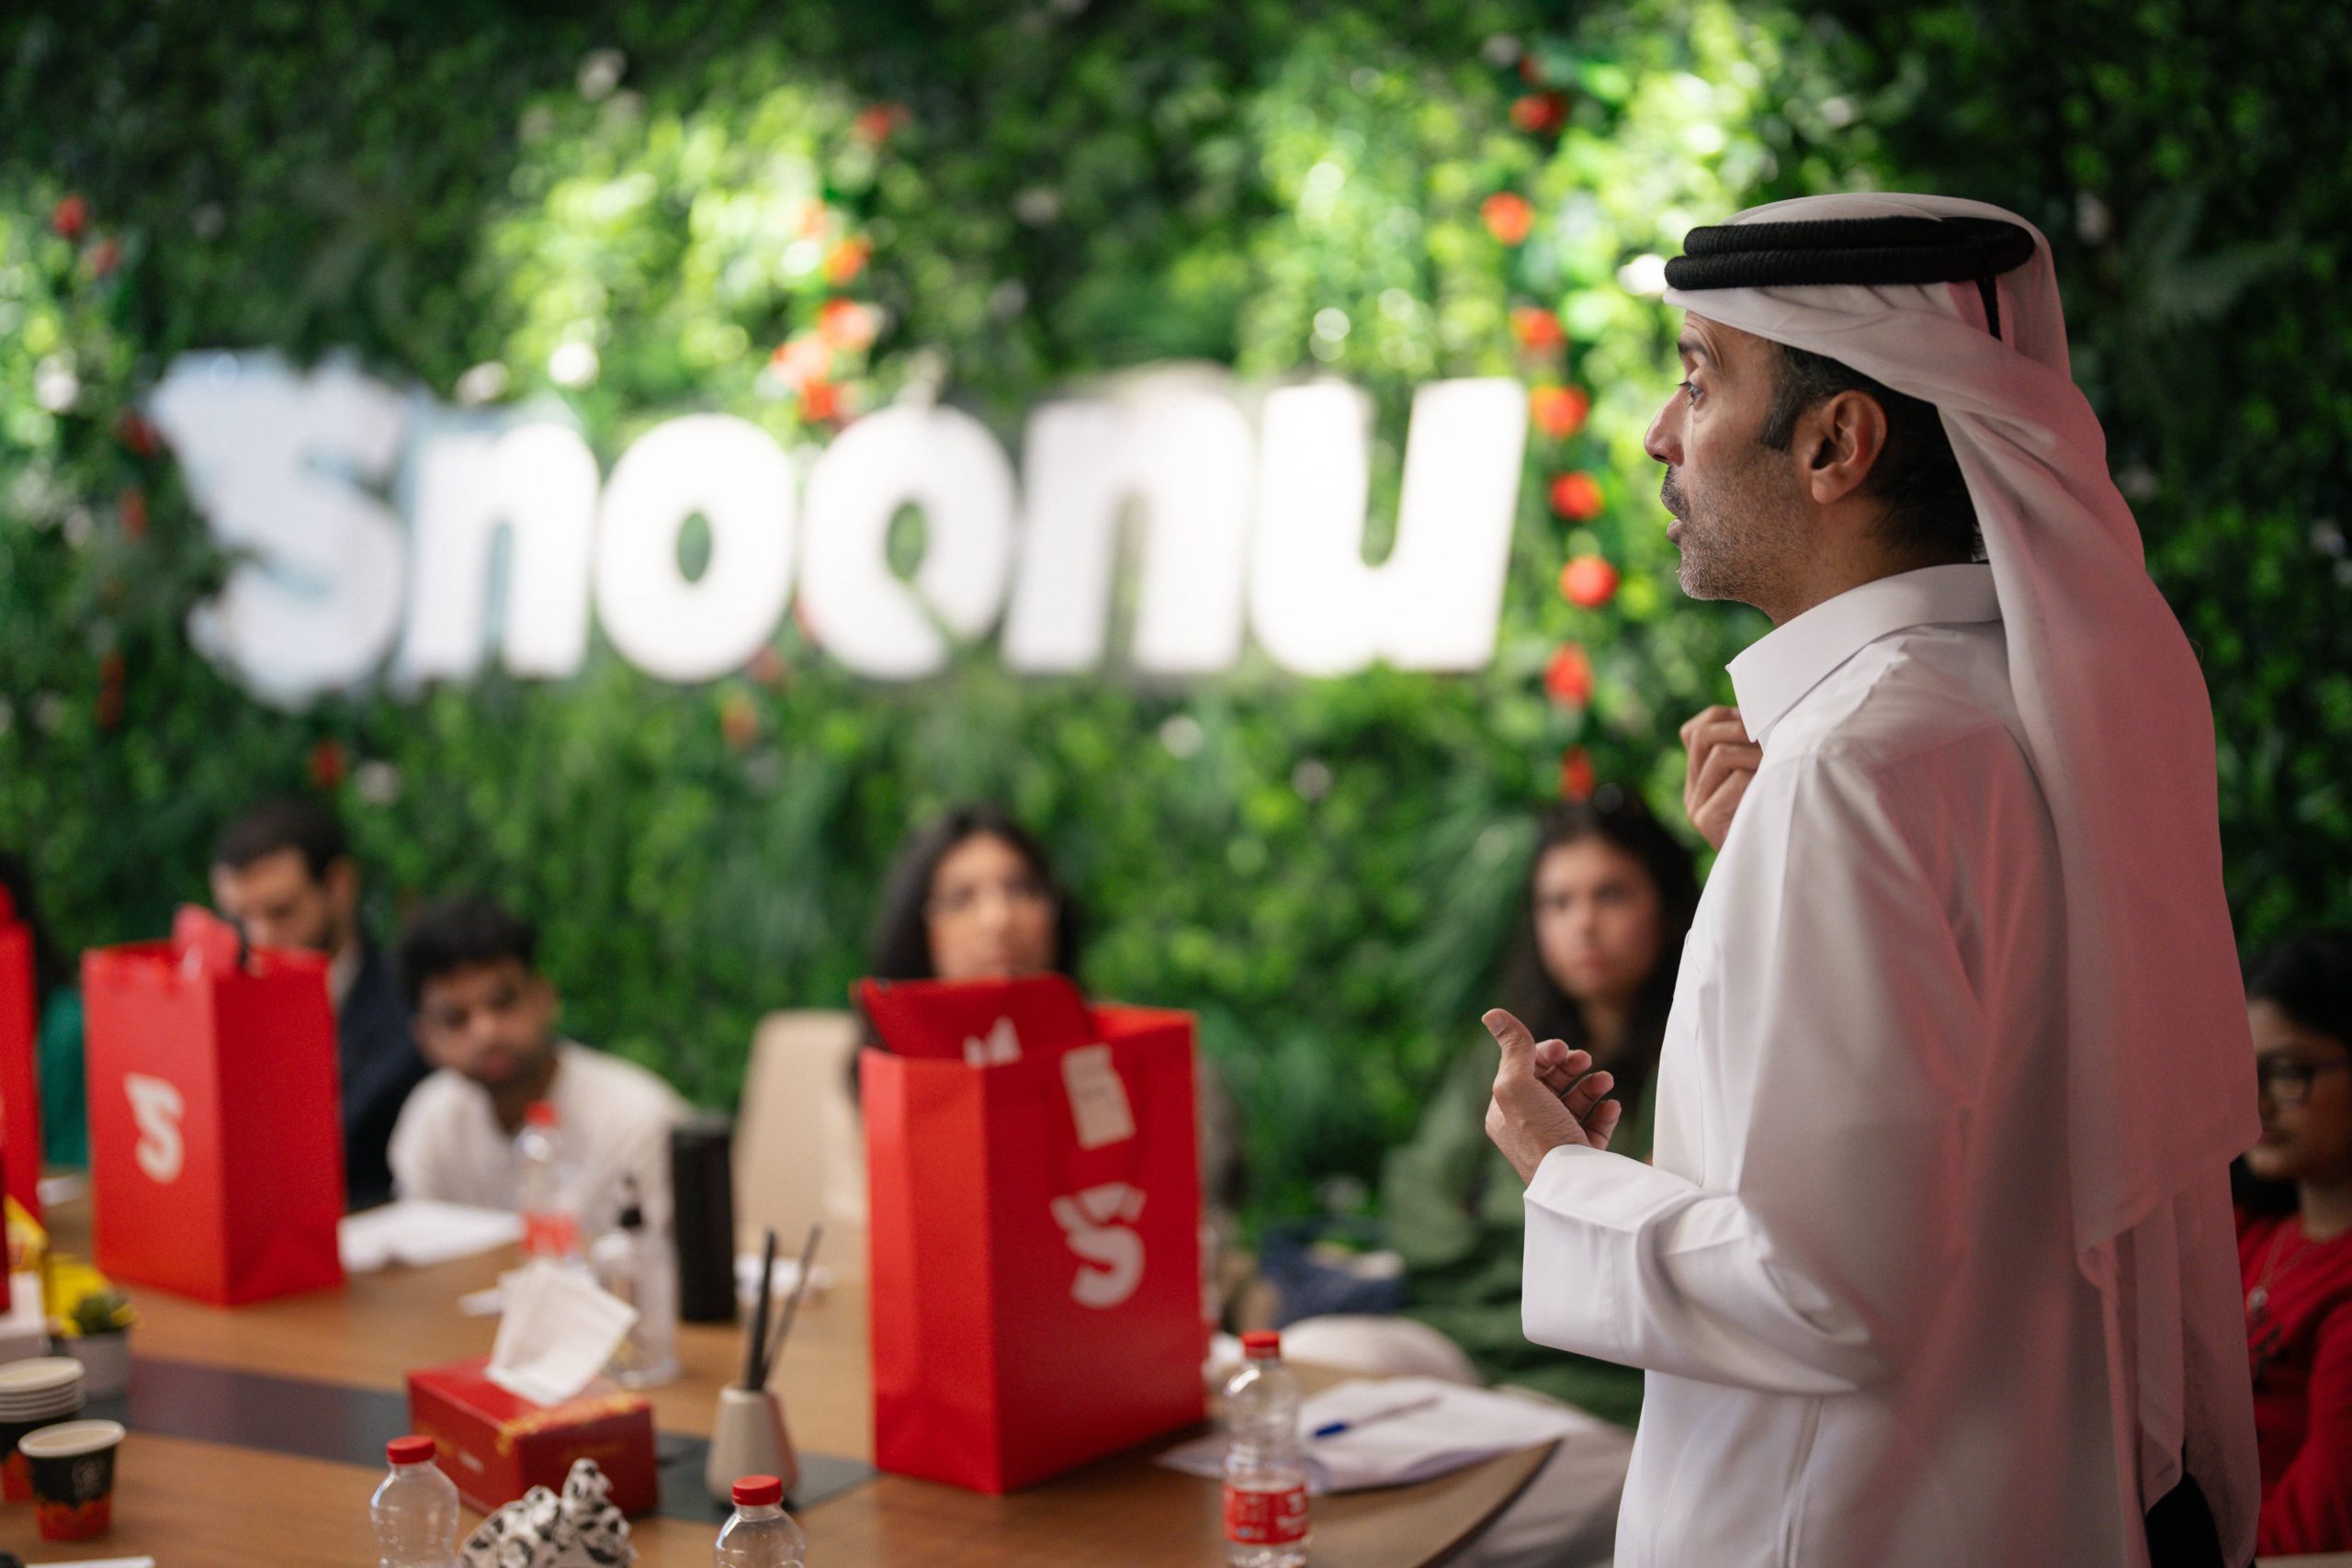 Snoonu Launches the 5th Edition of its Annual Summer Internship Program